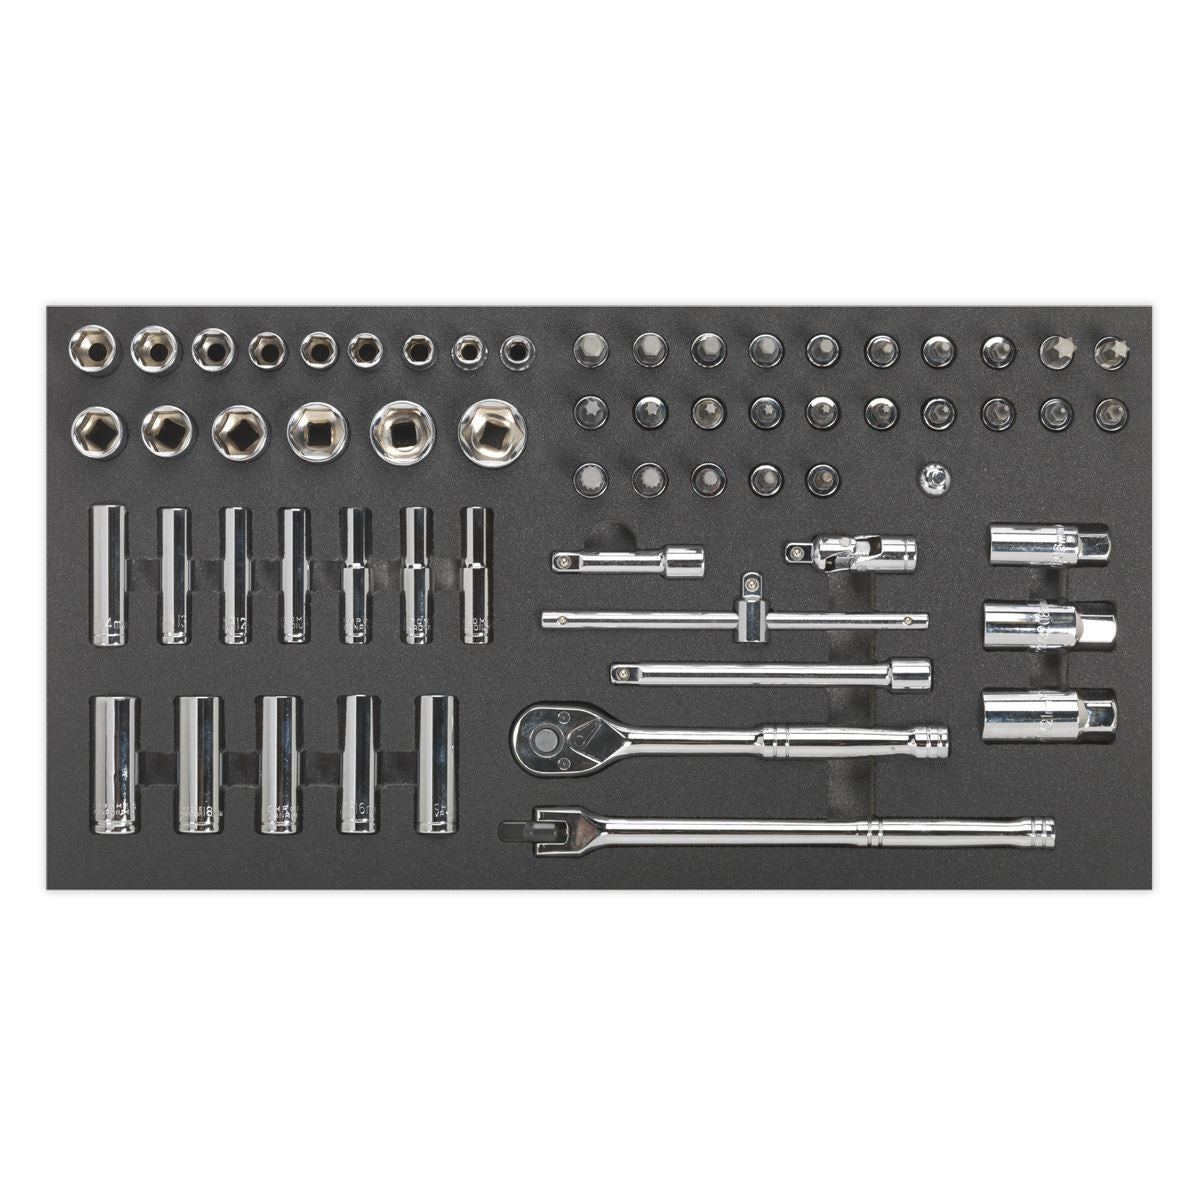 Siegen by Sealey Tool Tray with Socket Set 62pc 3/8"Sq Drive Metric